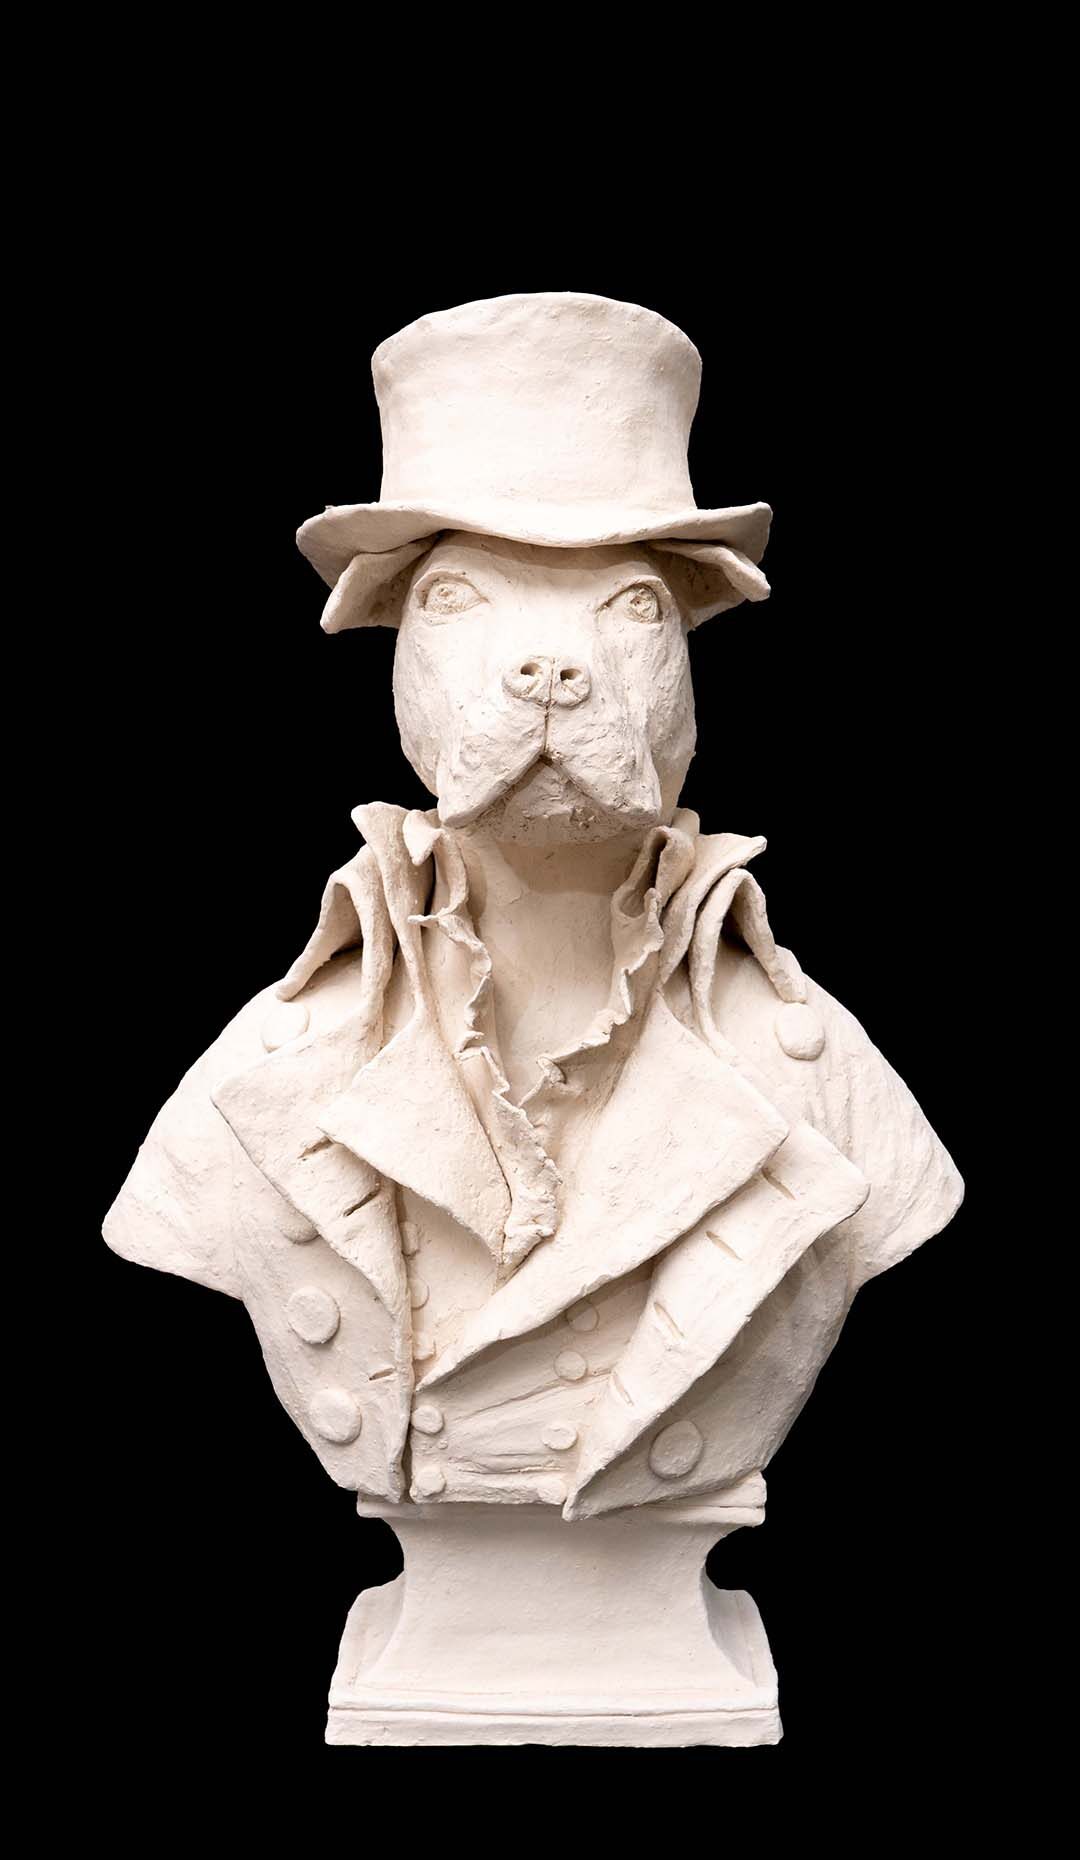 Large Terracotta Anthropomorphic Figure of a Dog wearing a Top Hat